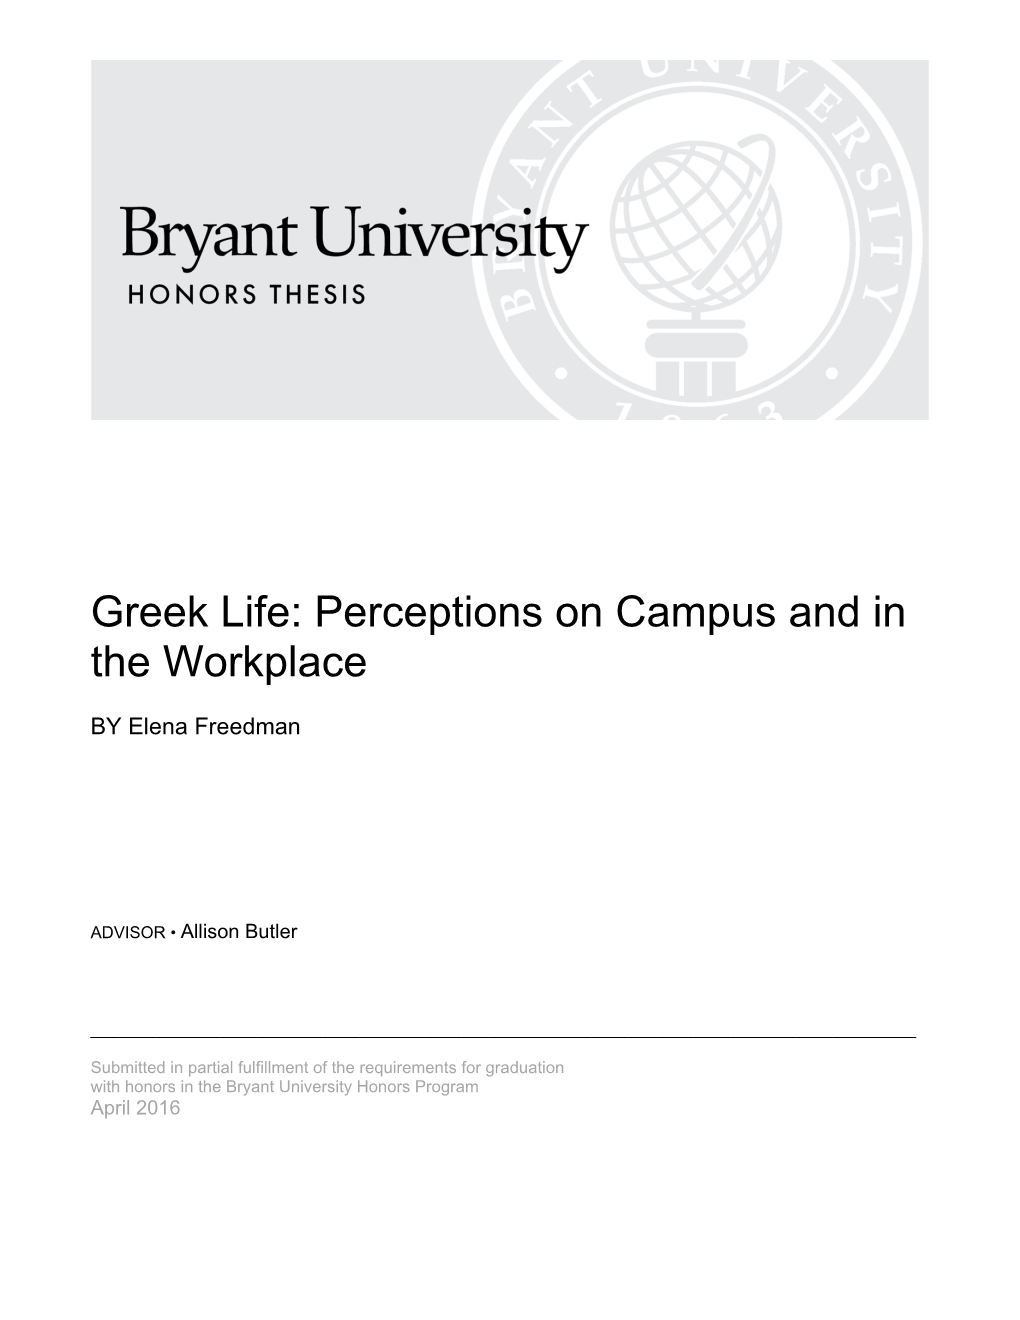 Greek Life: Perceptions on Campus and in the Workplace